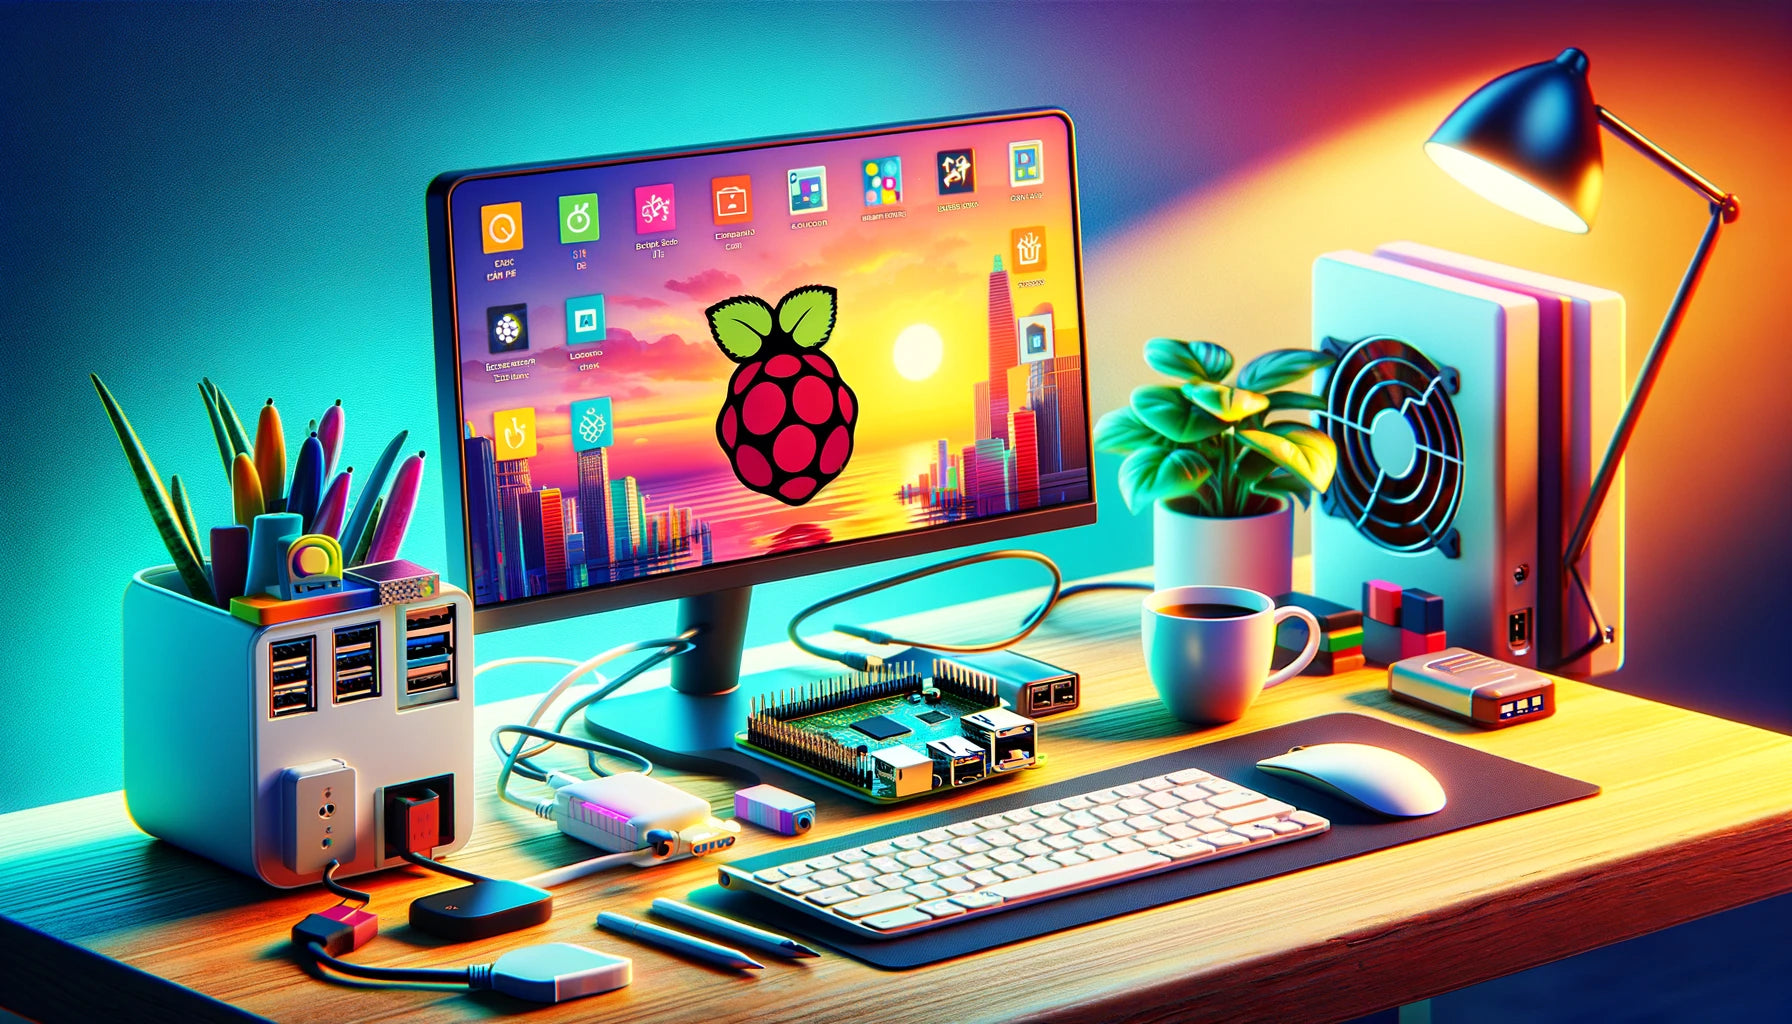 Getting Started with Raspberry Pi 5 for Everyday Computing